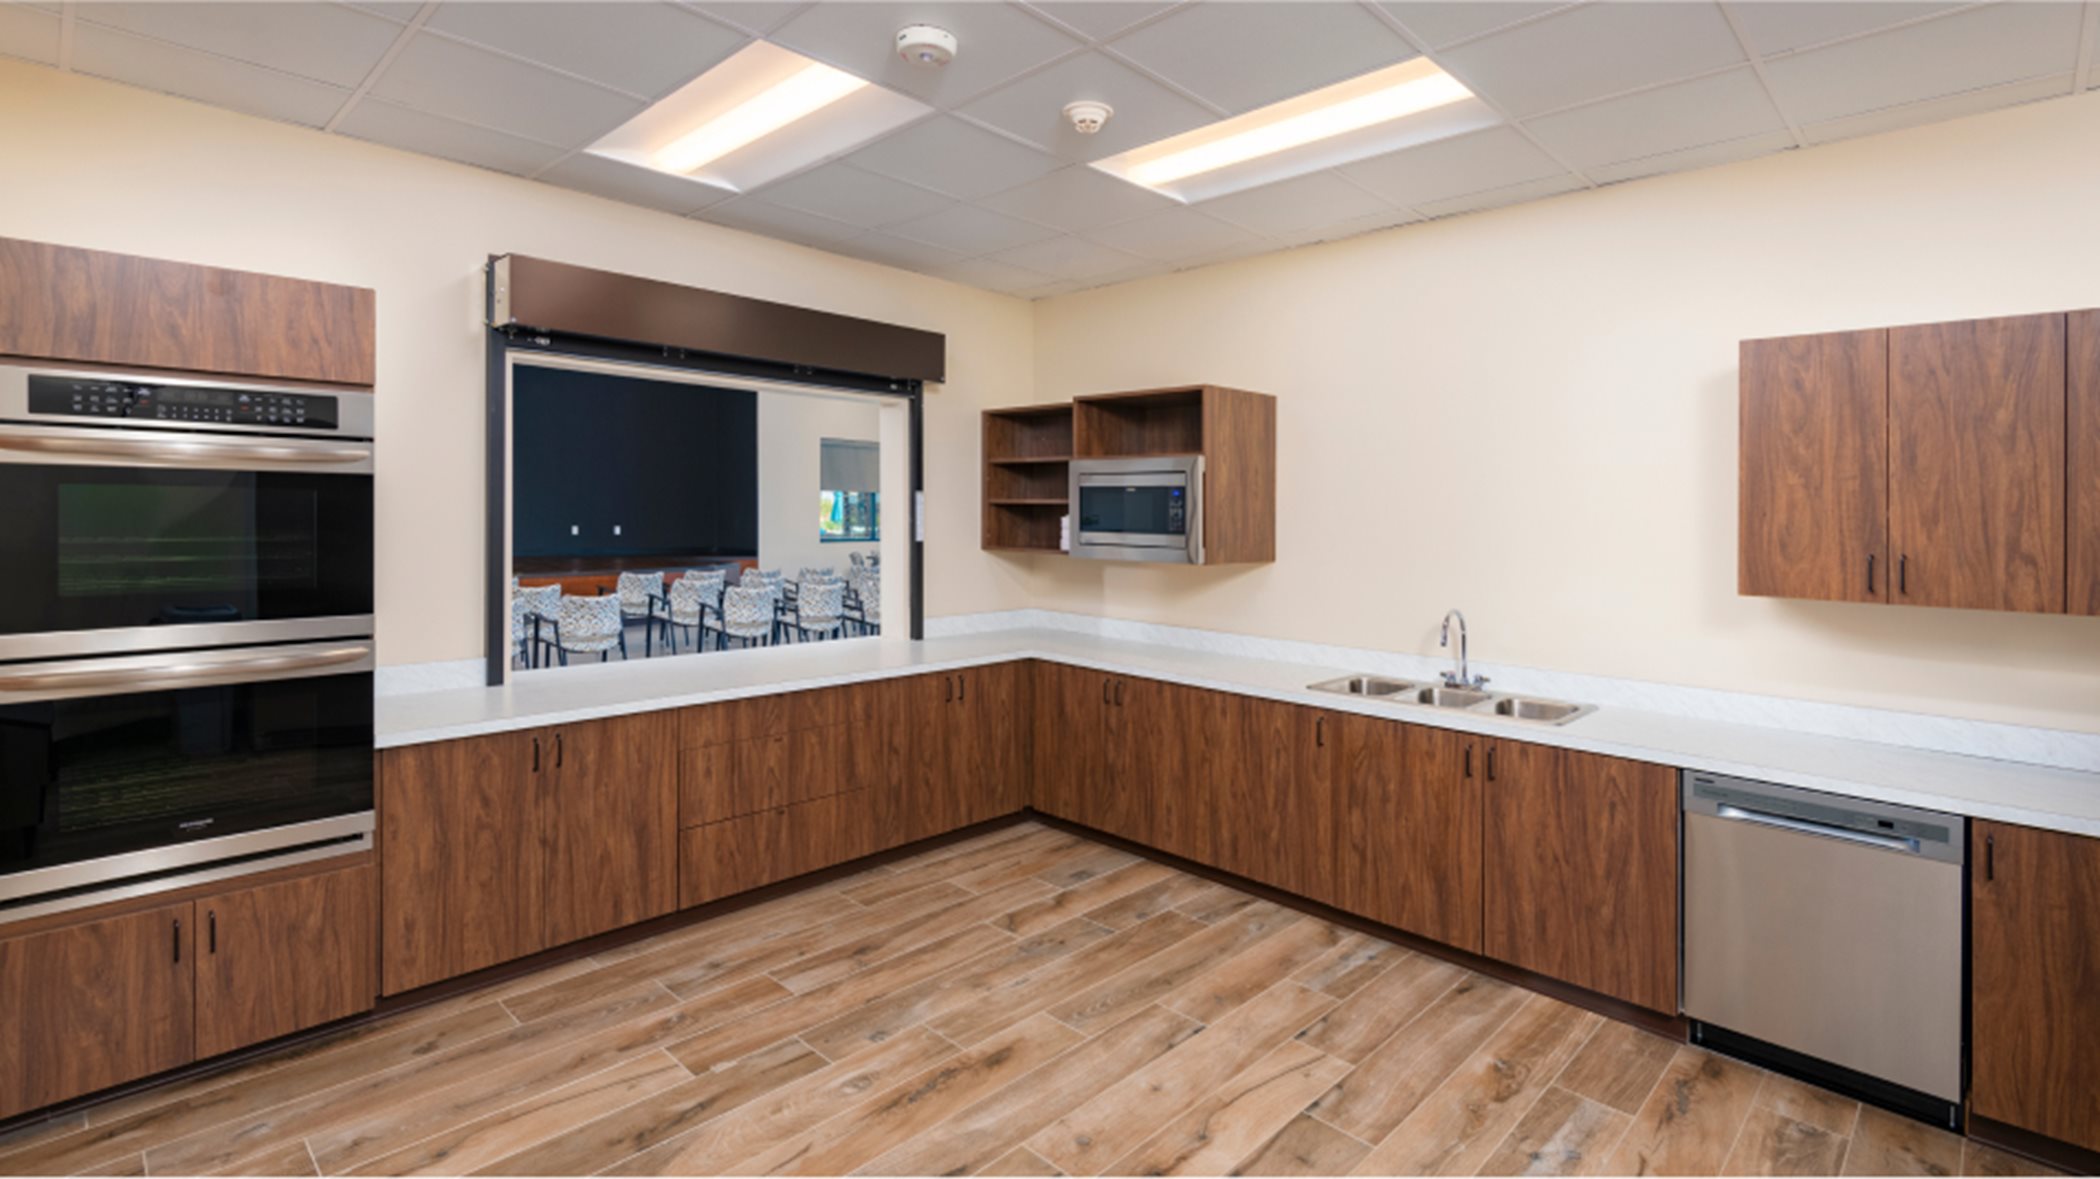 Shared kitchen in the clubhouse